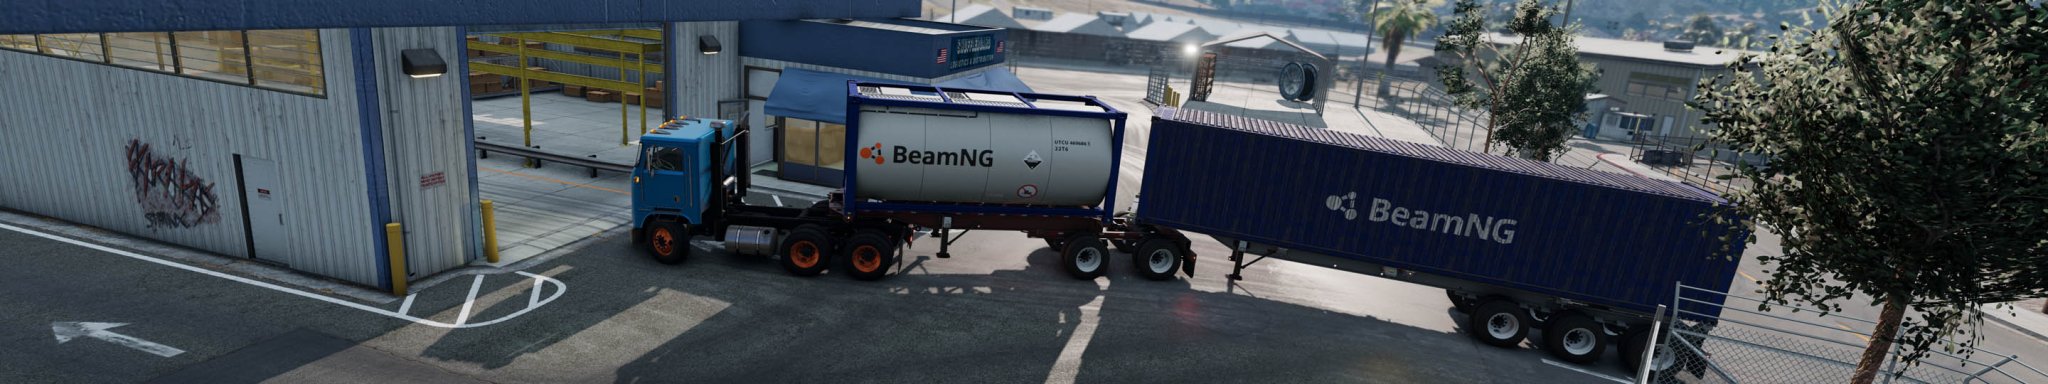 4 BeamNG GAVRIL TC83 BASE Towing 2 Traliers copy.jpg